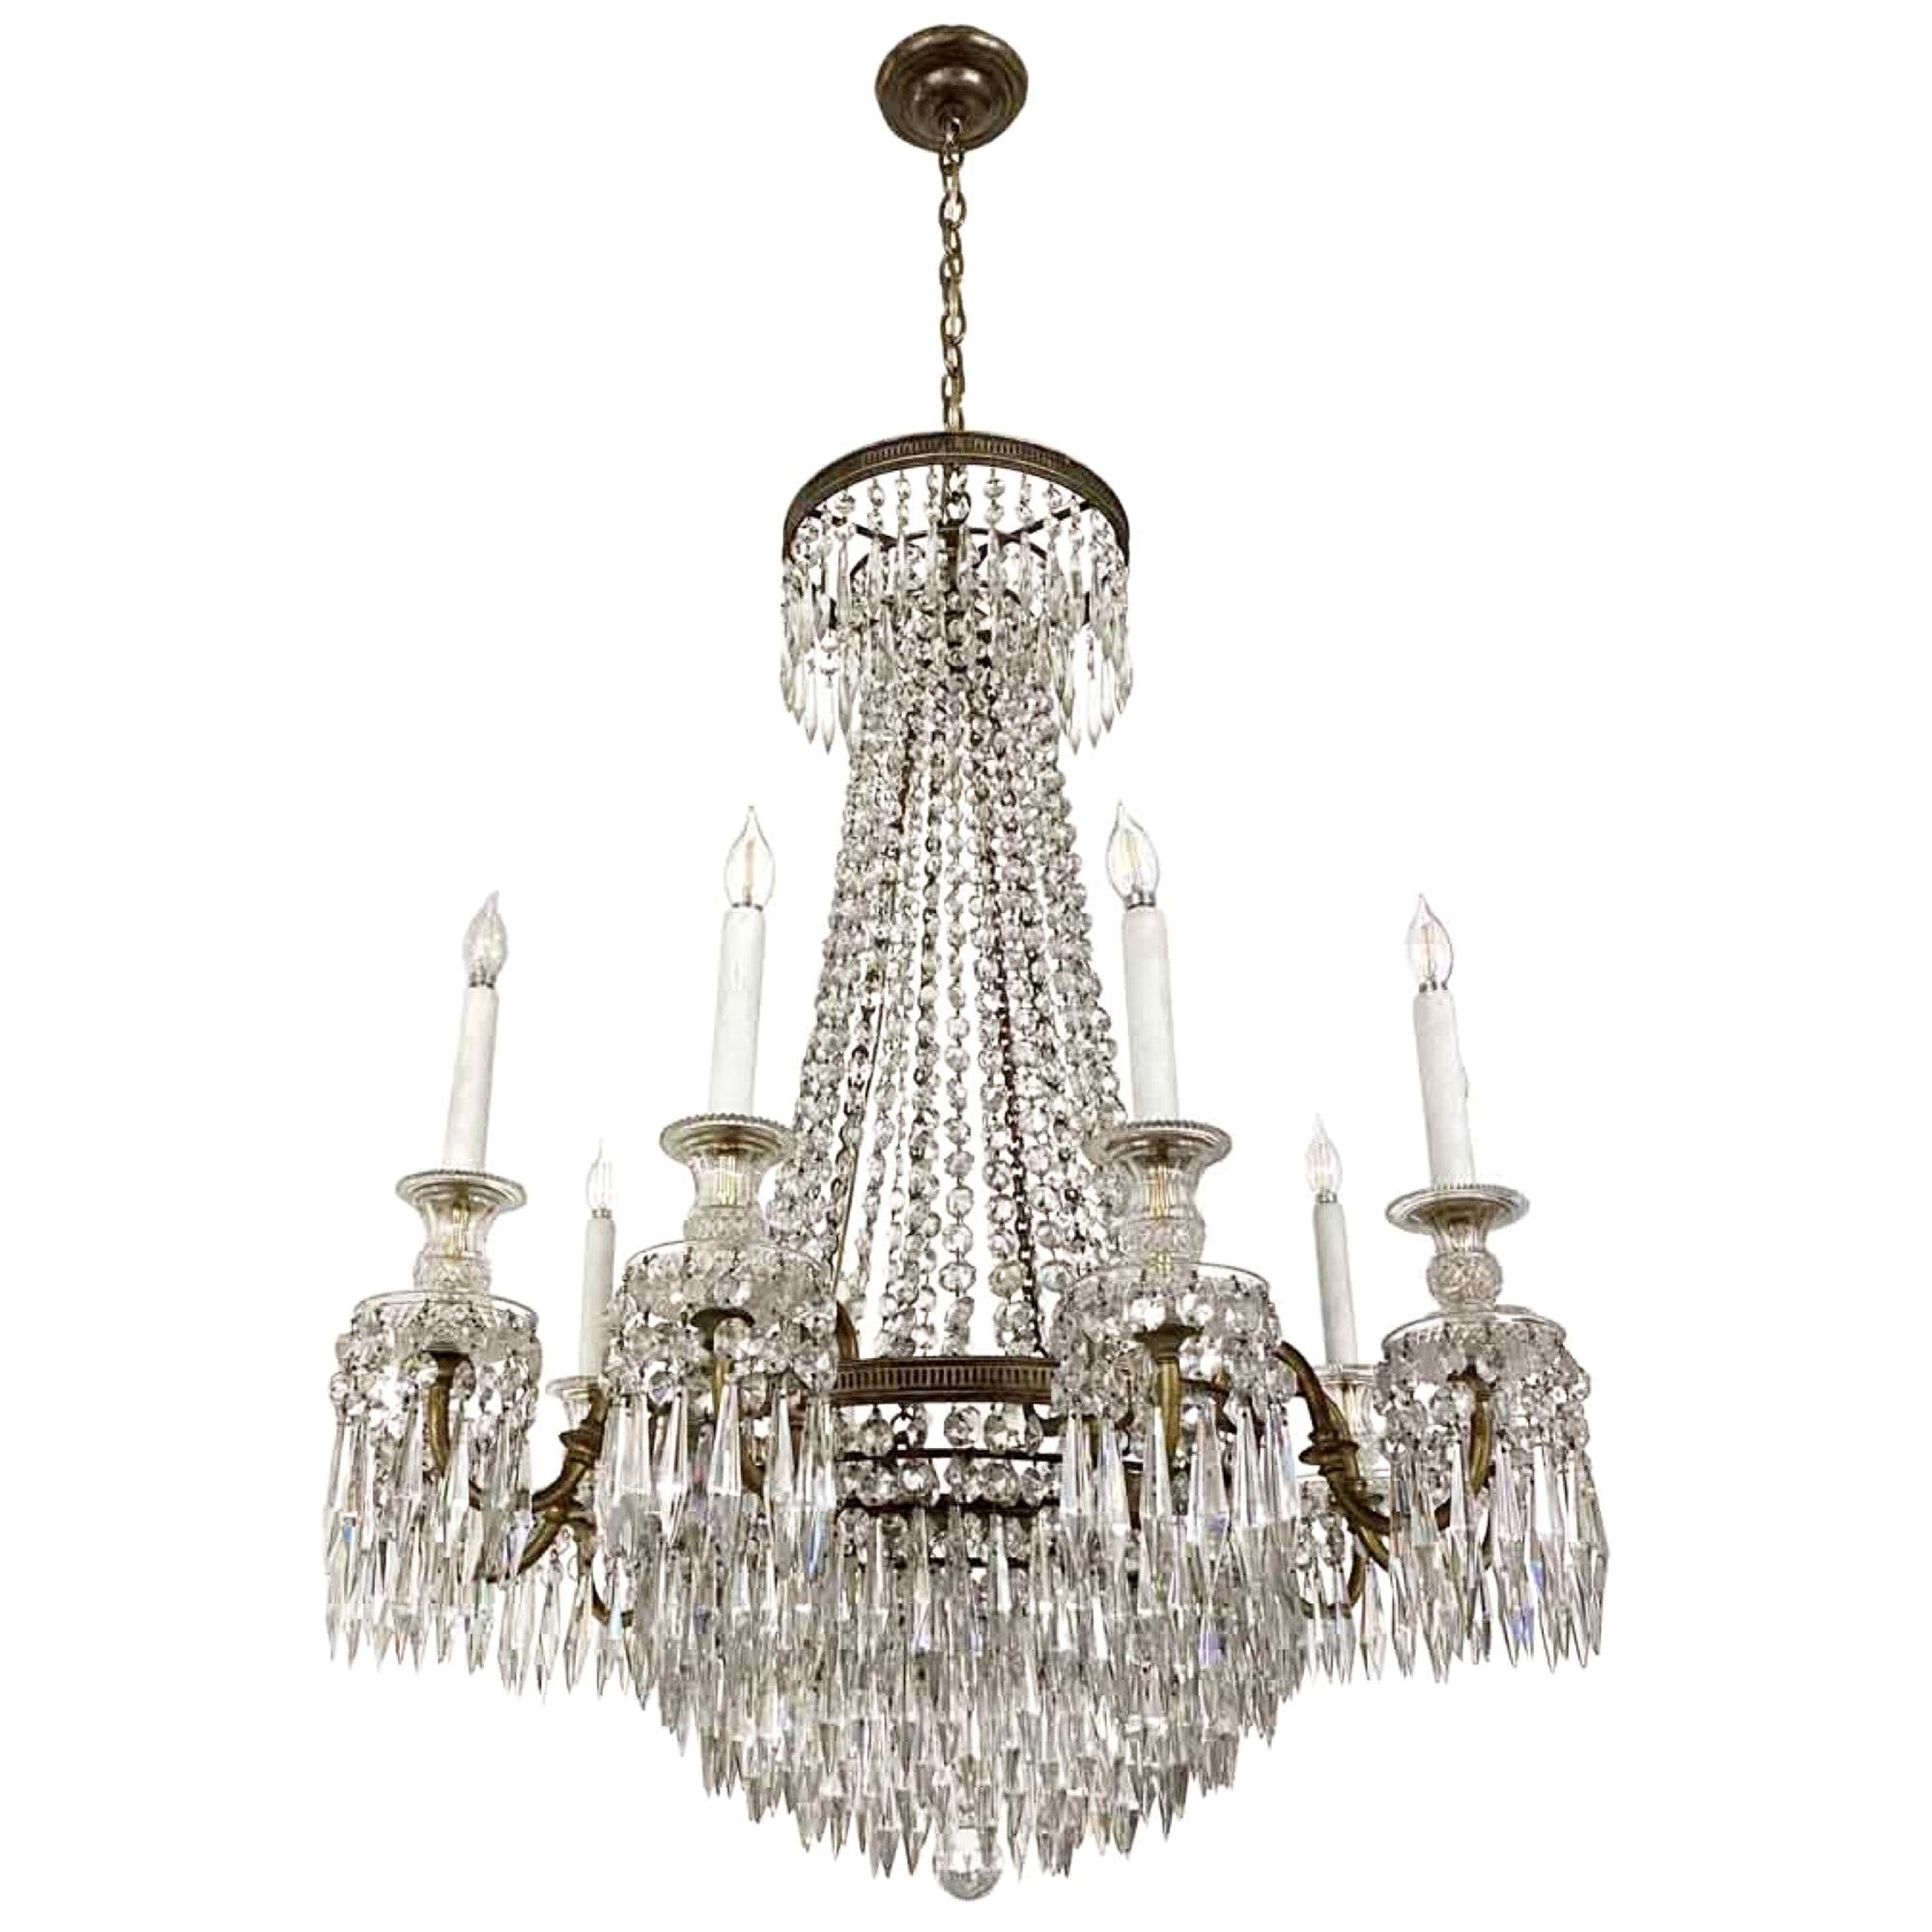 1920s French Regency Crystal and Bronze Chandelier Antique with Hand Cut Crystal For Sale